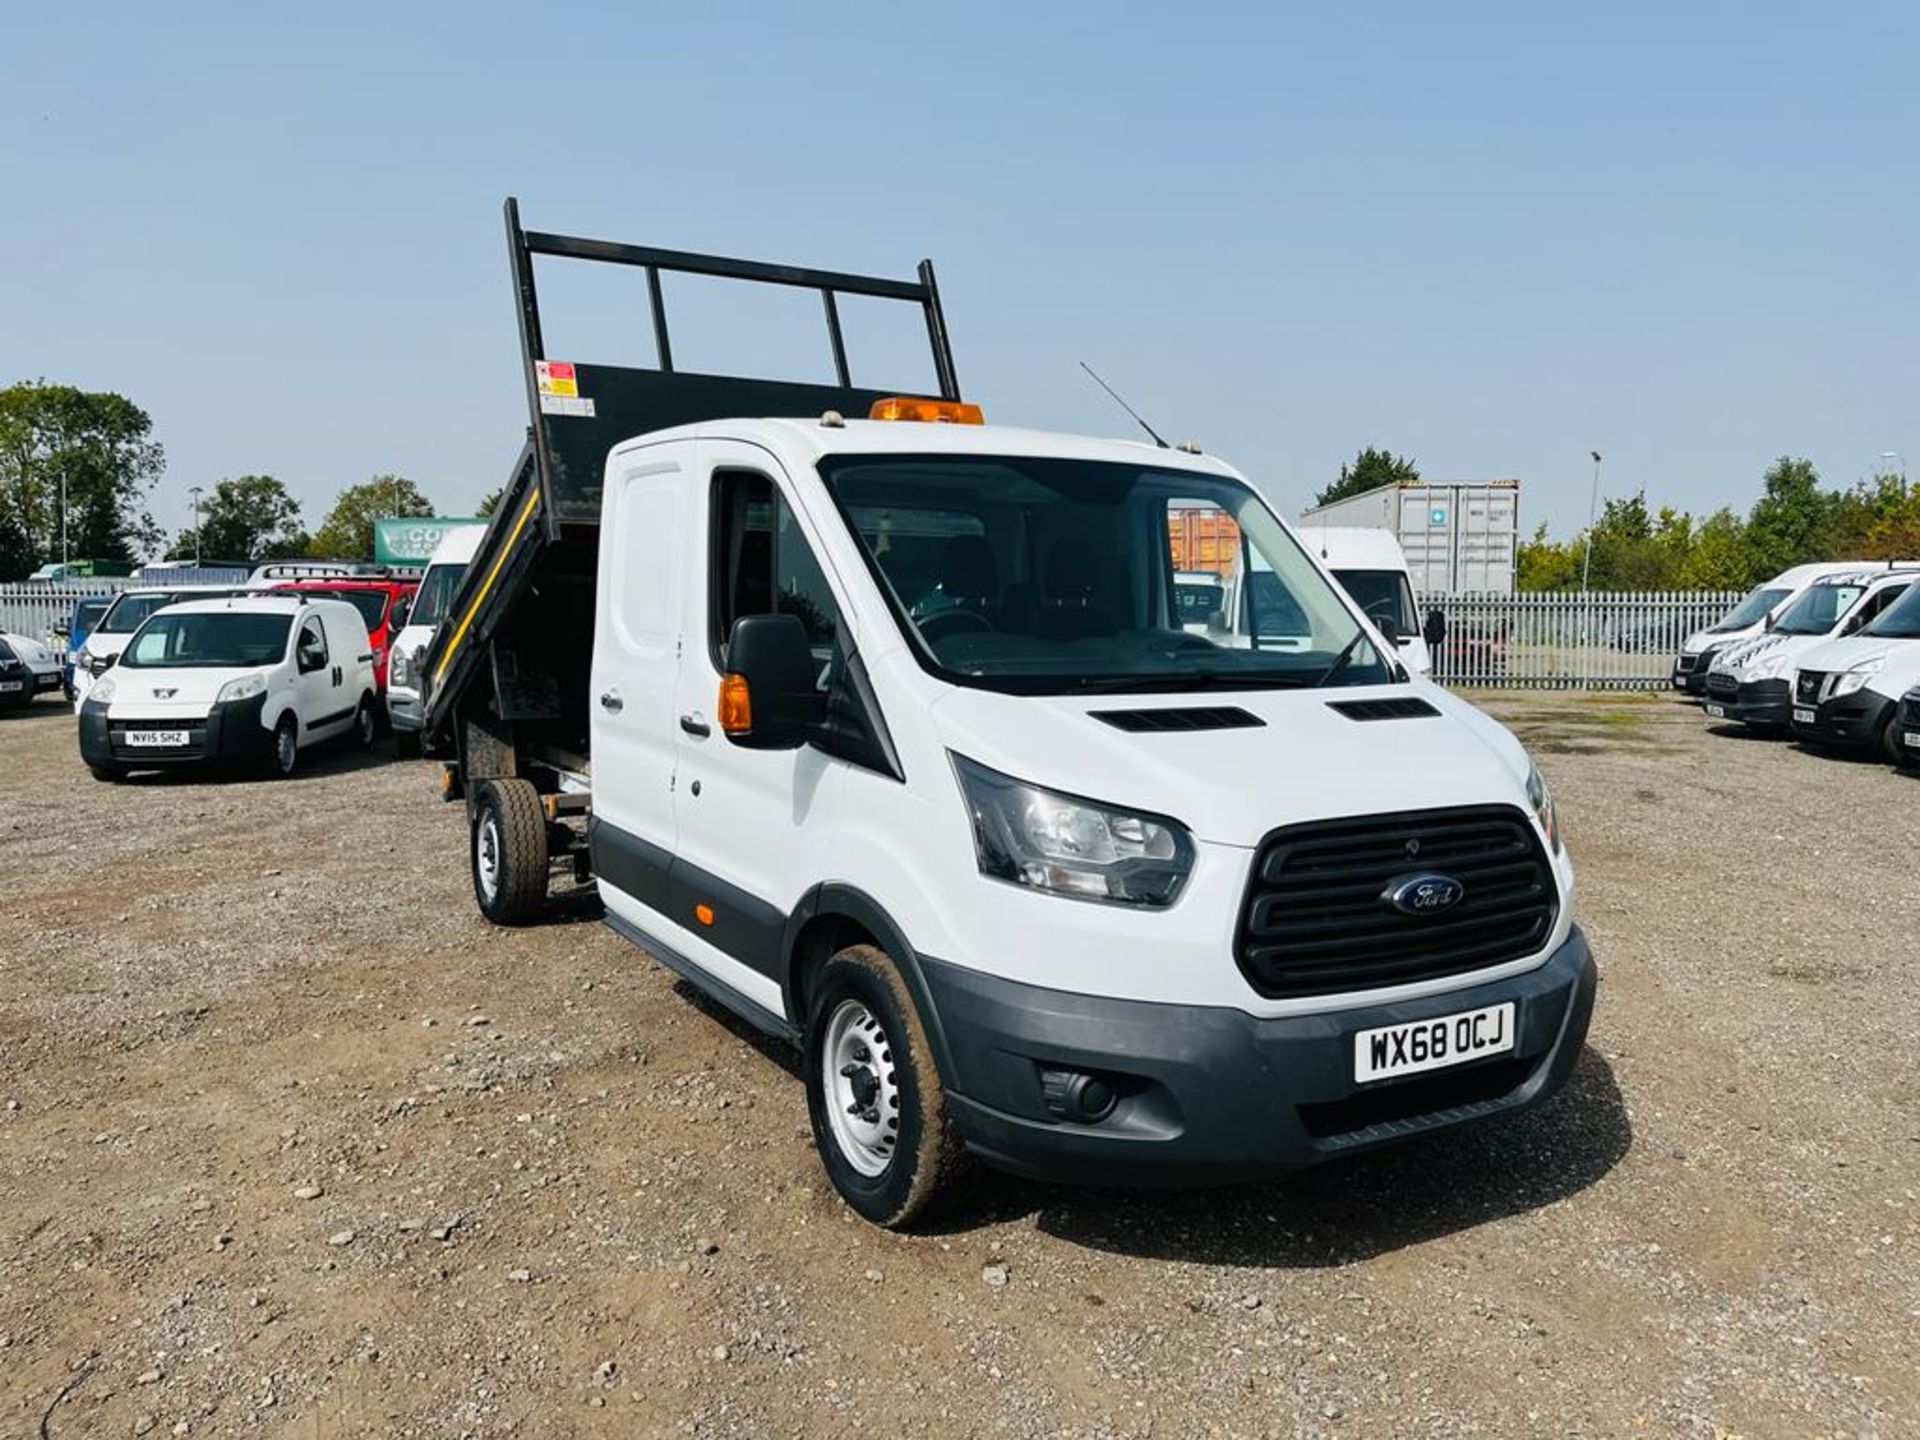 ** ON SALE **Ford Transit Chassis Cab 350 RWD 2.0 TDCI 130 2018 '68 Reg' - Tow Bar - Long Wheel Base